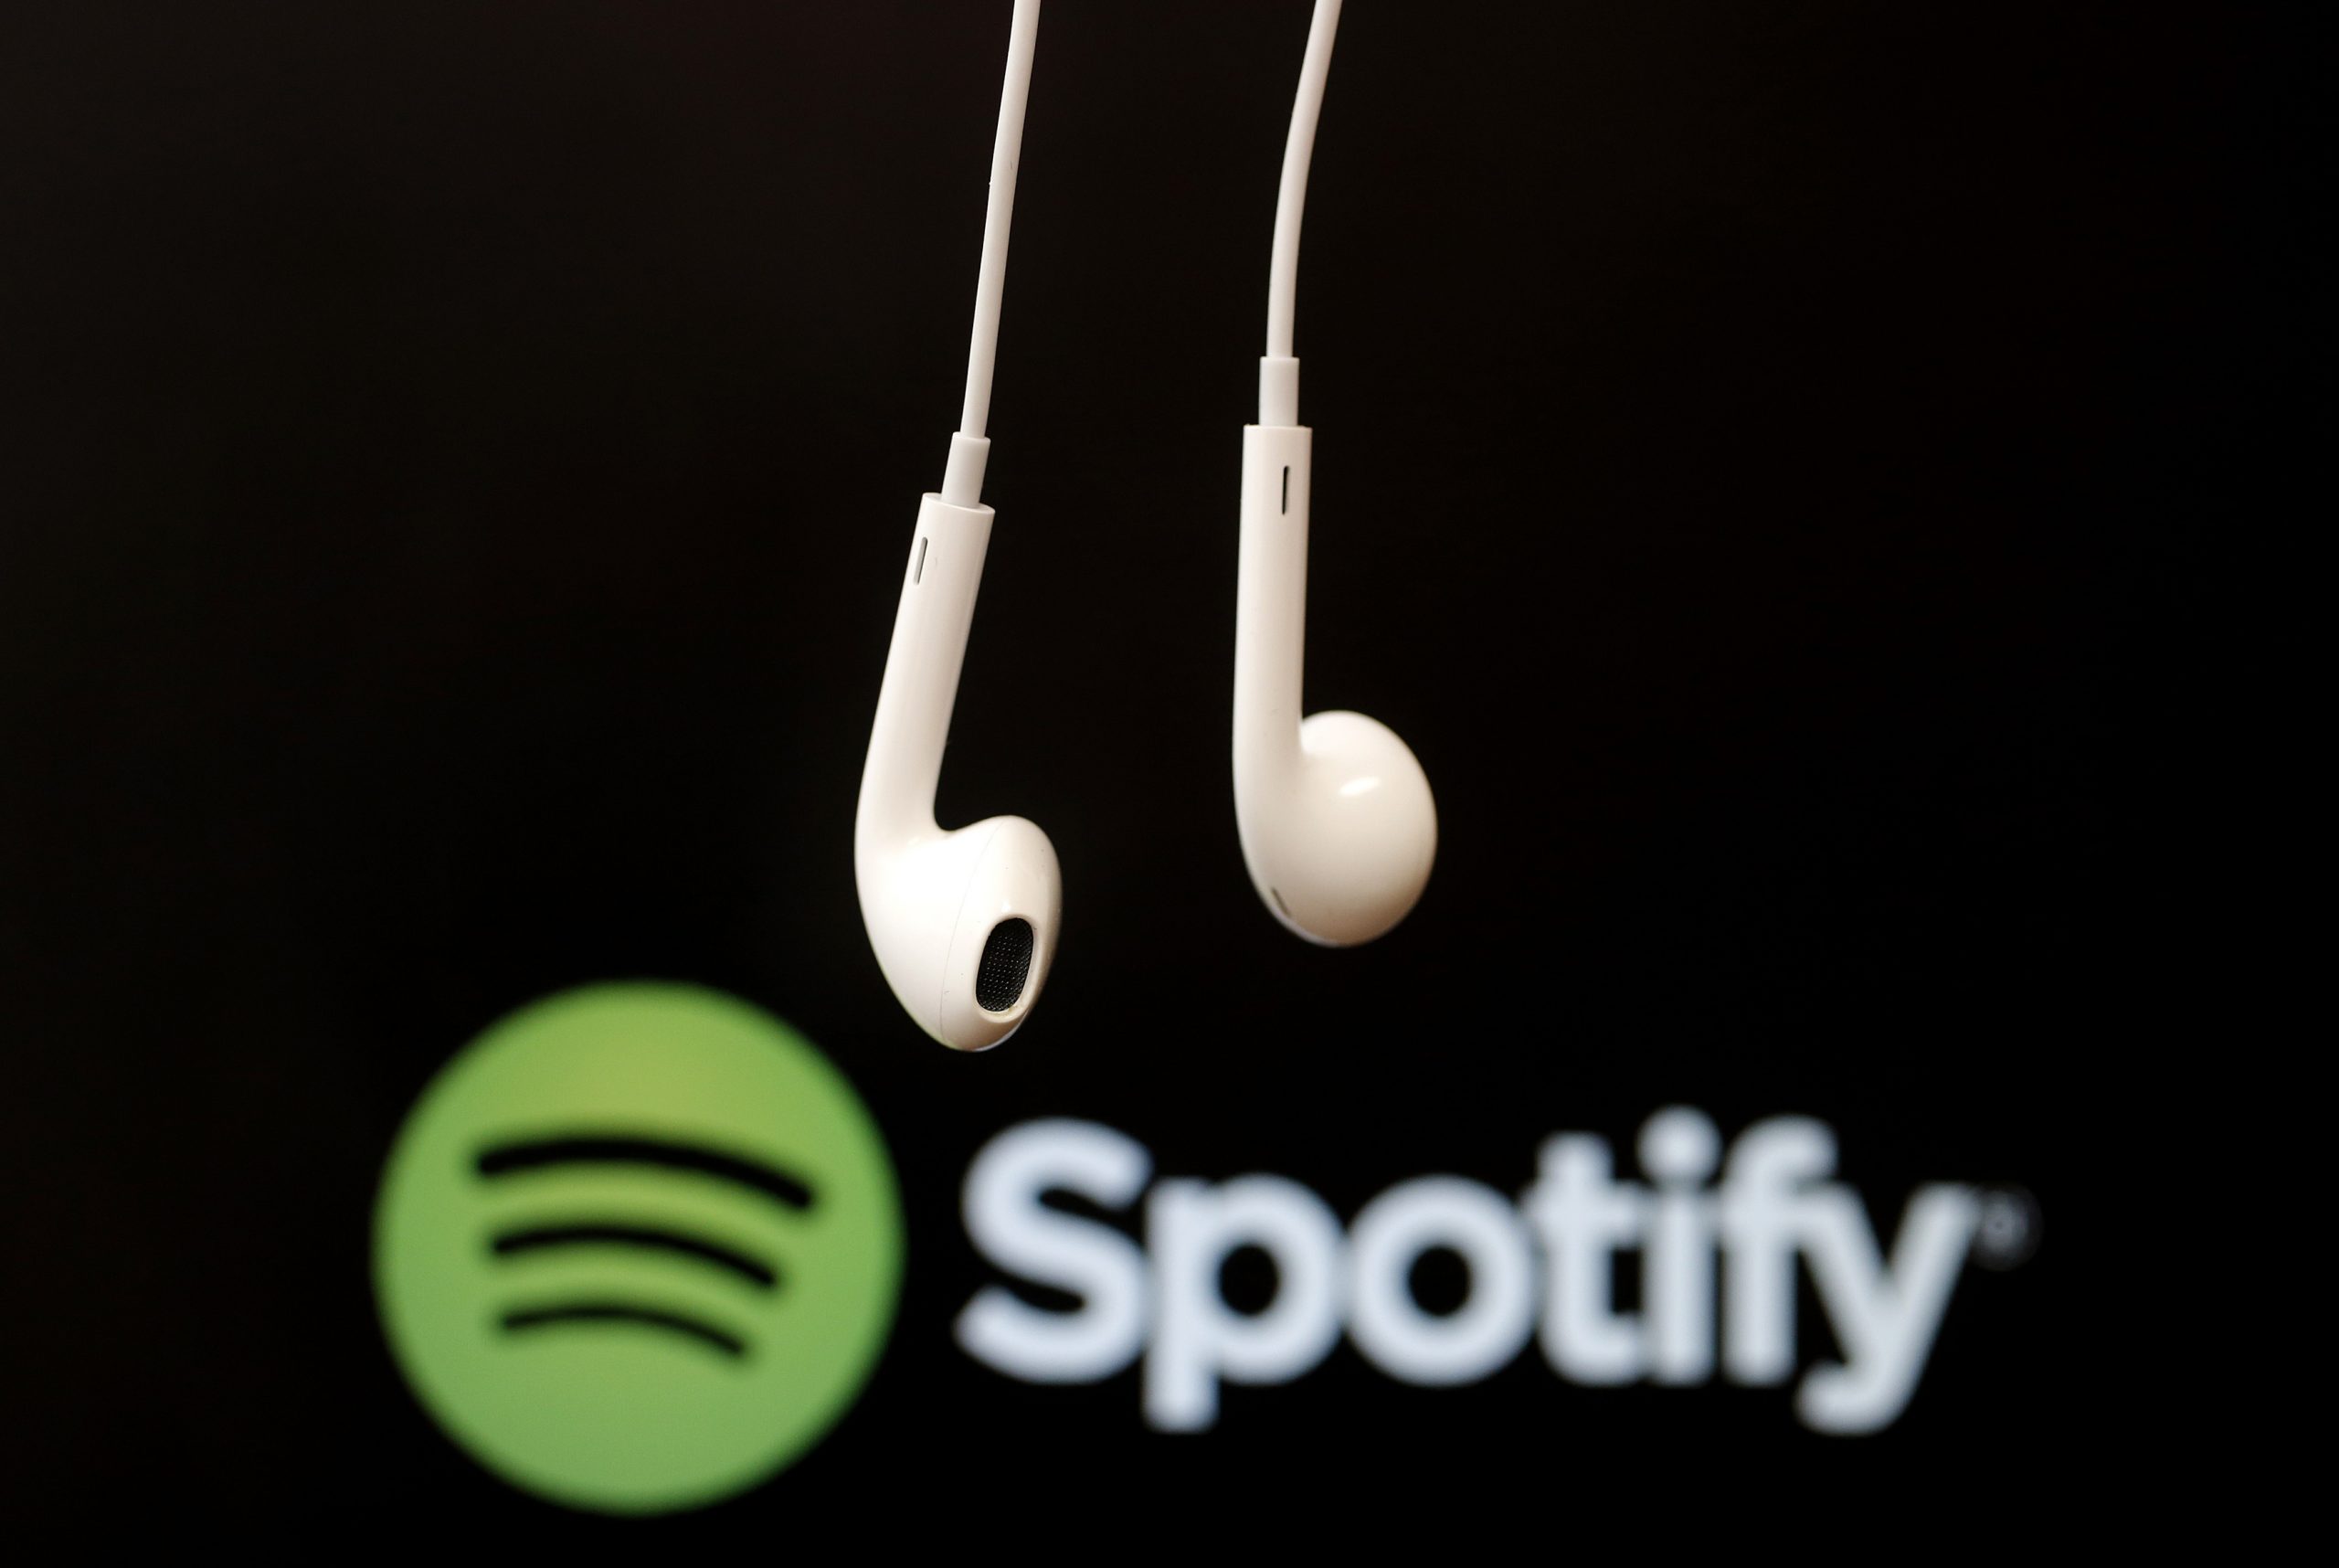 New Reports States 120,000 Tracks Added Every Day to Streaming